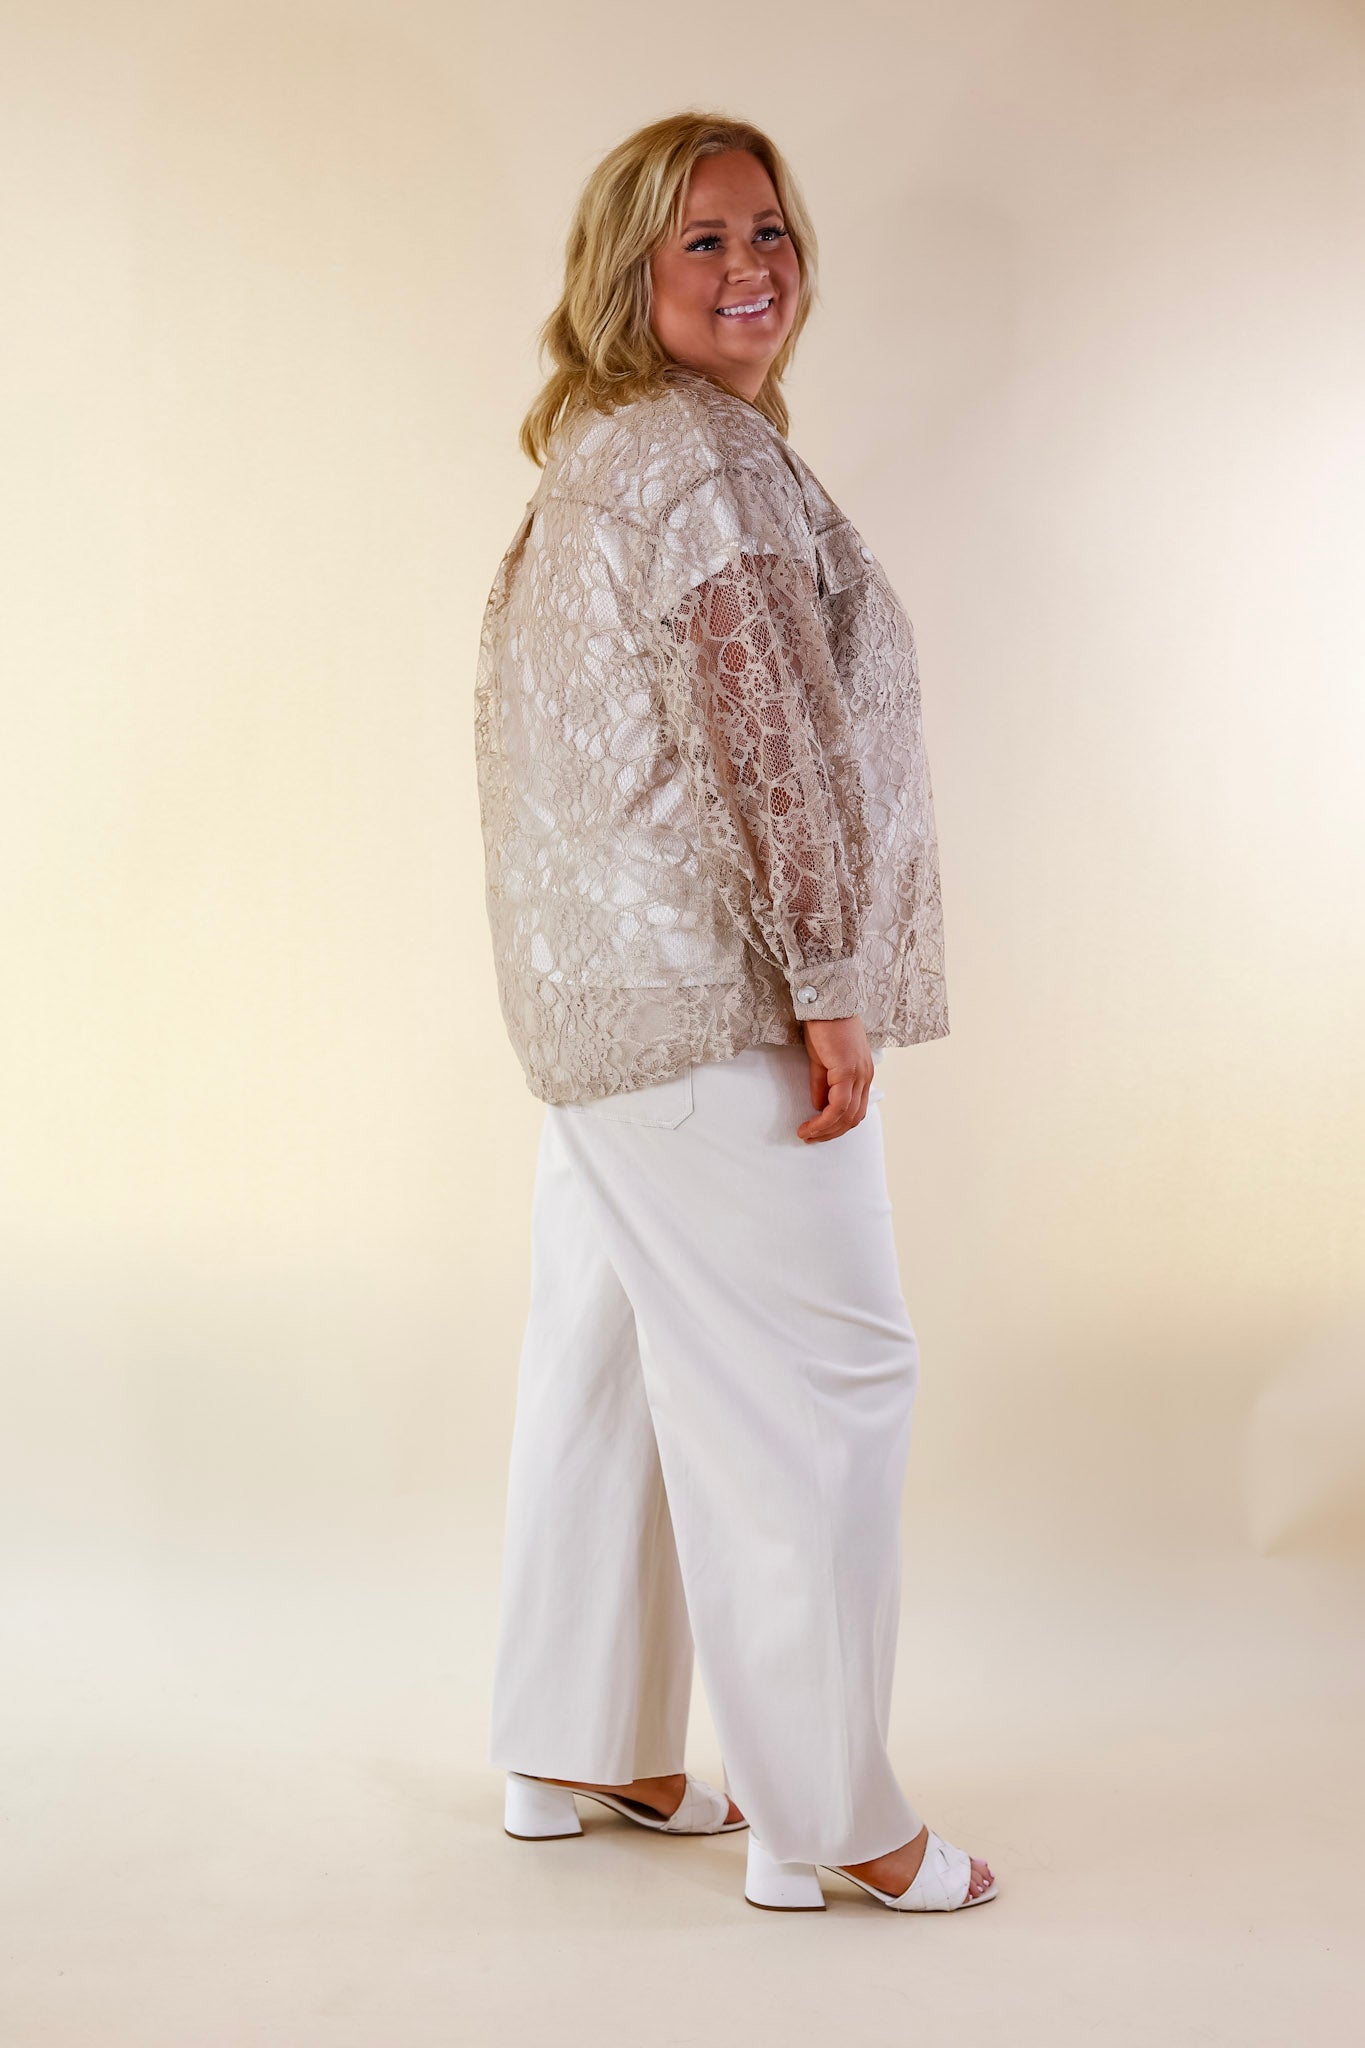 Sheer Chic Collared Button Up Lace Top in Taupe